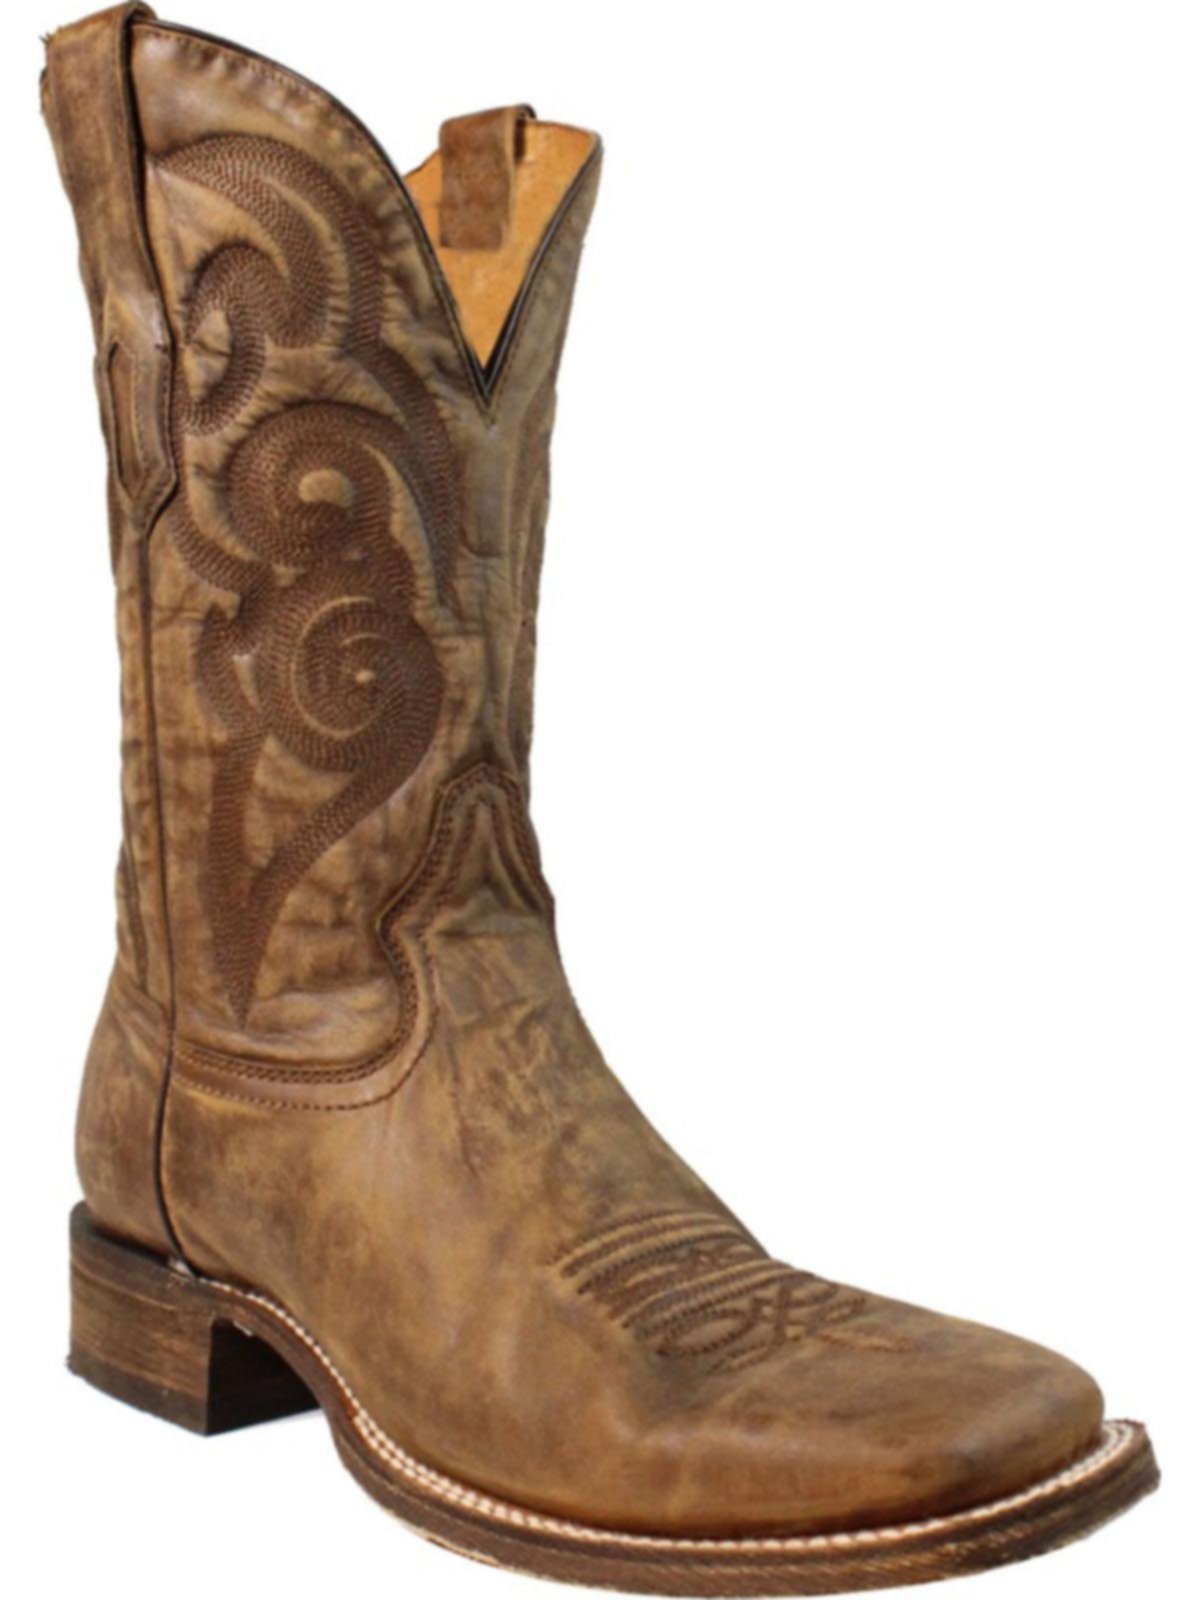 Corral Men's Golden Embroidery Square Toe Cowboy Boots A3302 